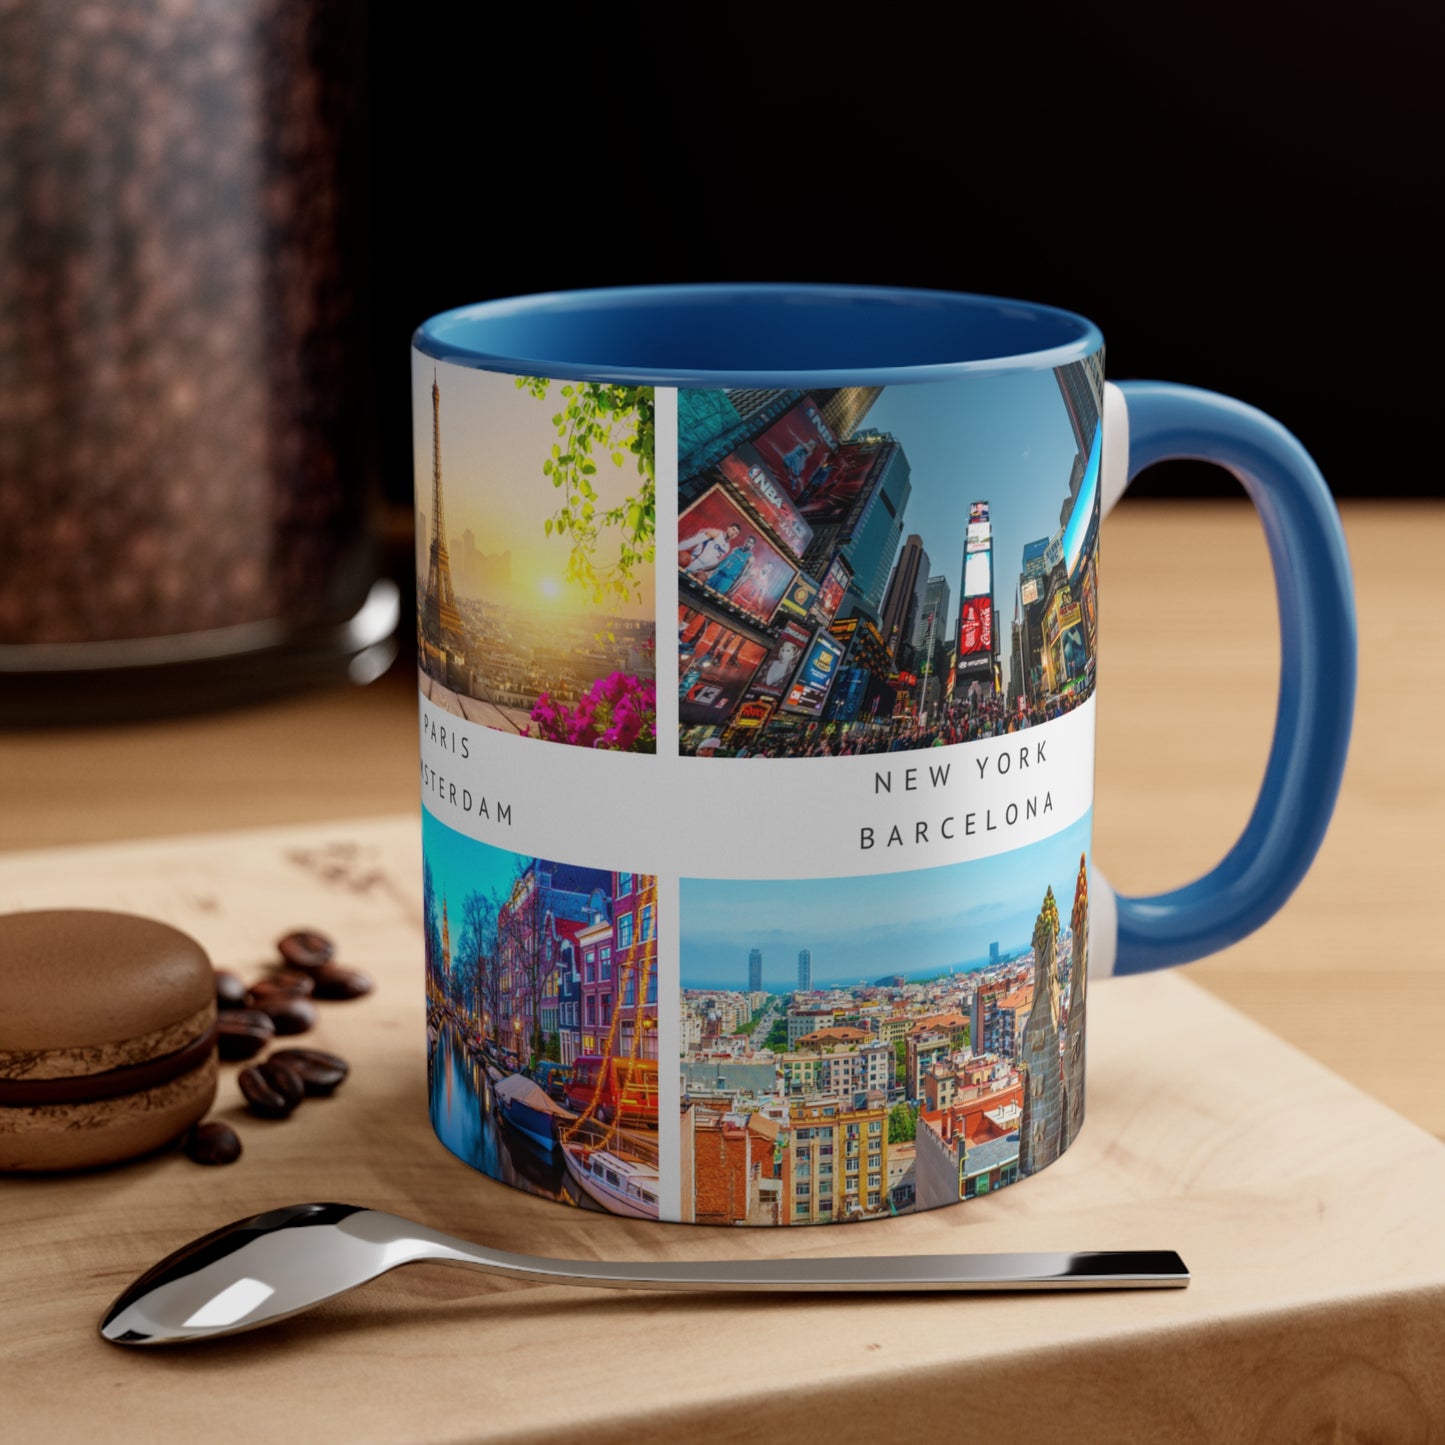 London, Montreal, Paris, Amsterdam, New York and Barcelona! This Travel Accent Coffee Mug is a part of a Travel Series for you to choose from. 11oz. Great as a gift or get one to enjoy yourself.